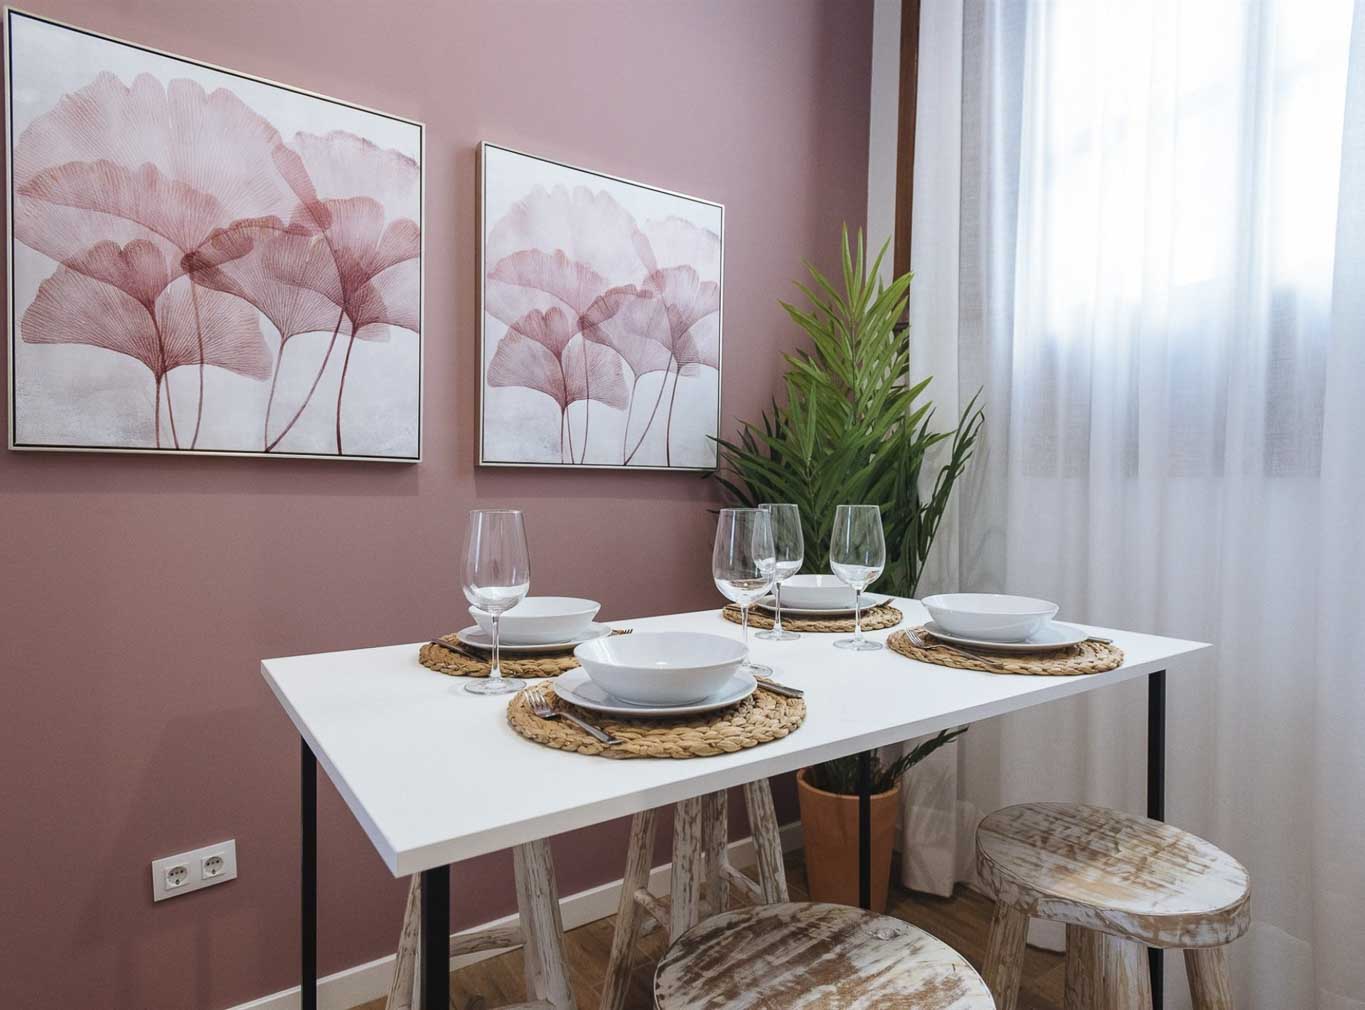 Family apartments in Seville